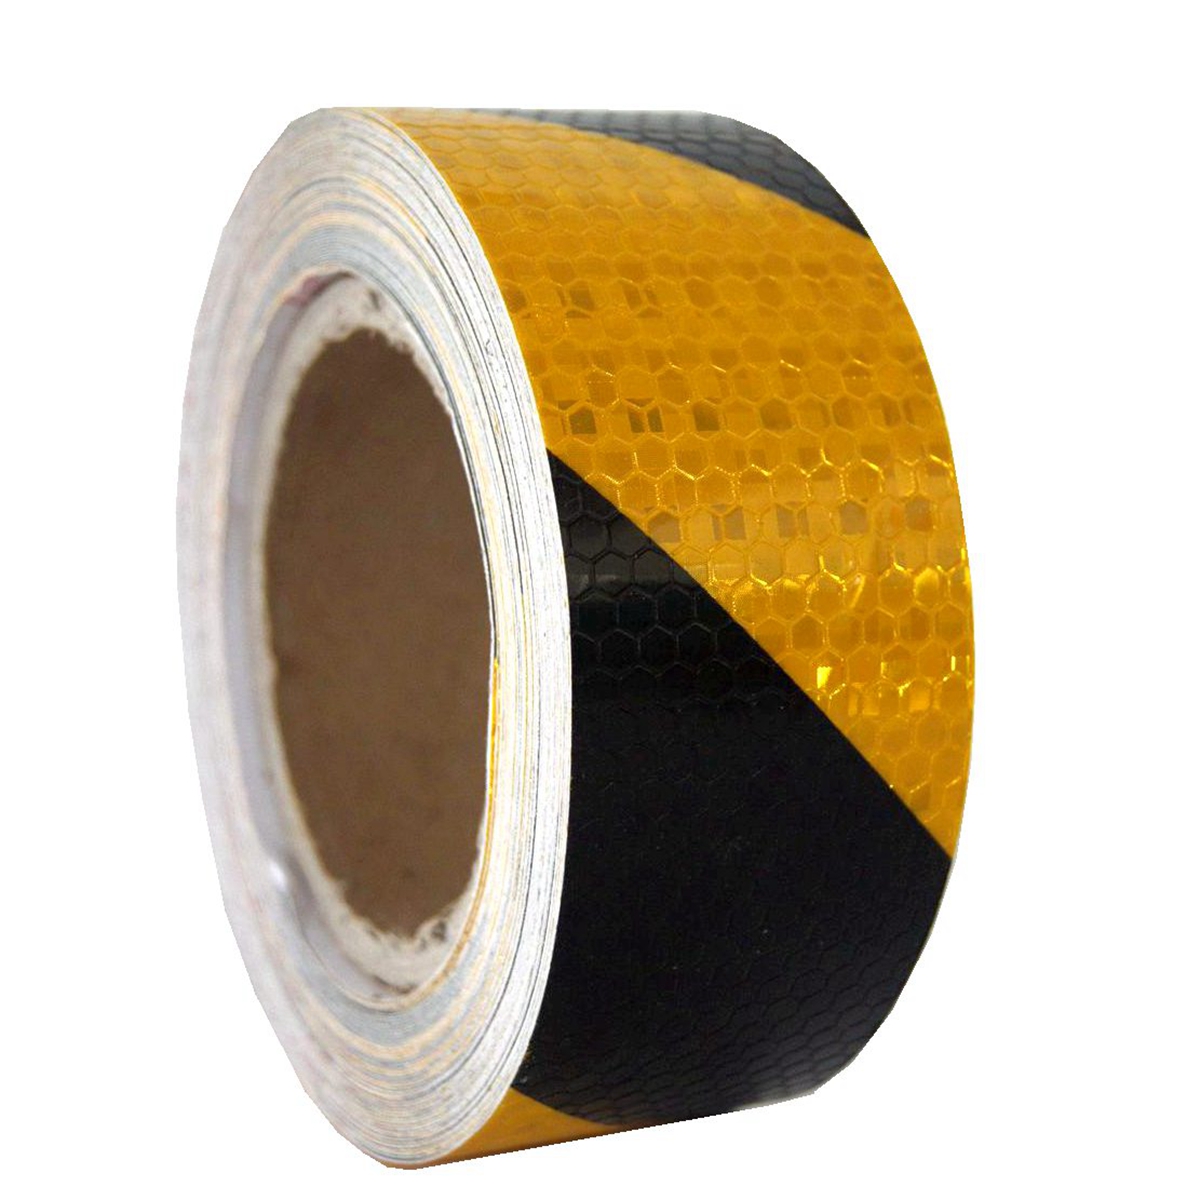 Hot Sale Customize Printed Signal Adhesion Safety Flagging Barrier PVC Reflective Warning Tape